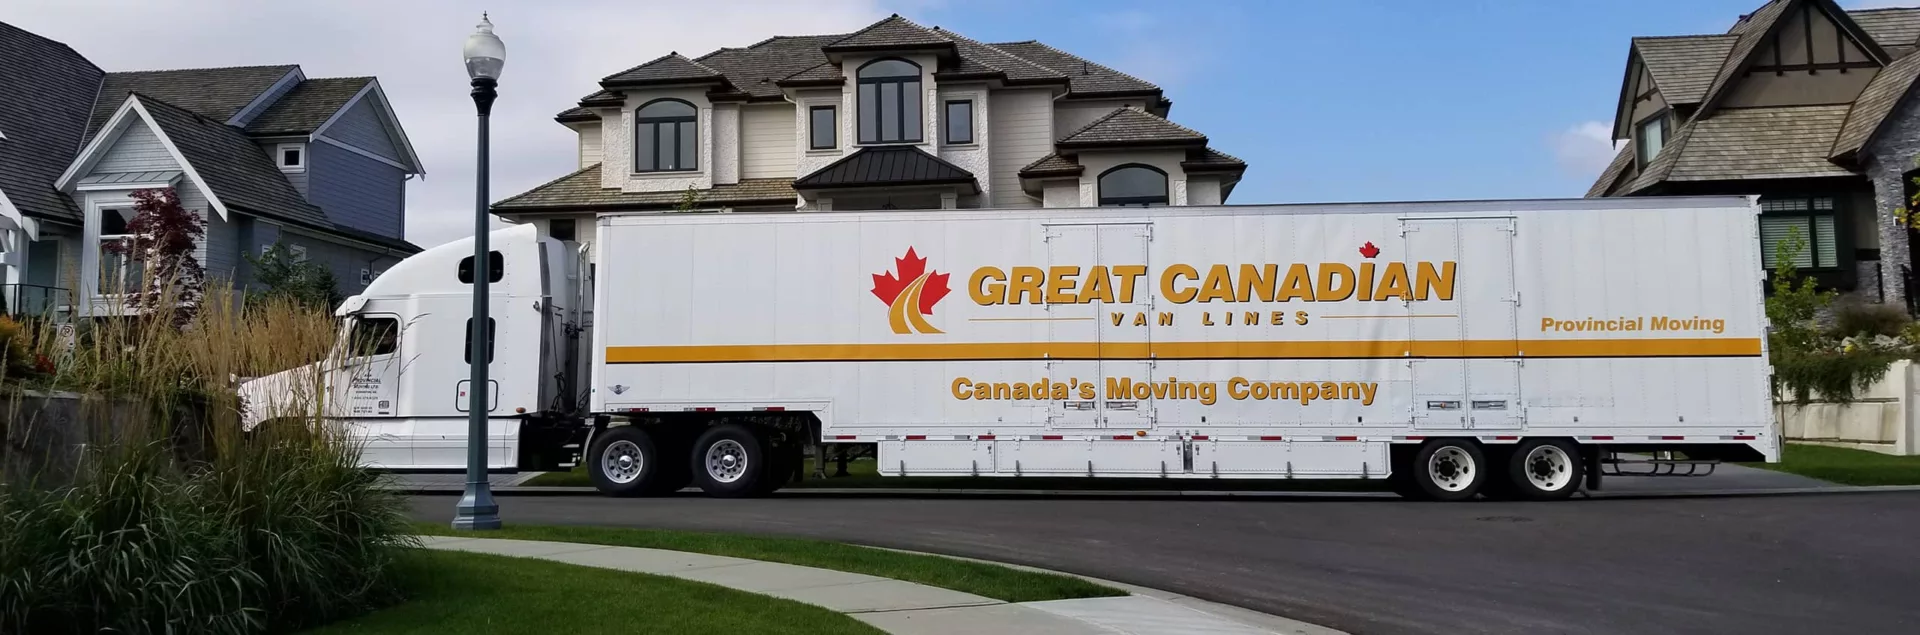 Great Canadian long distance moving company.